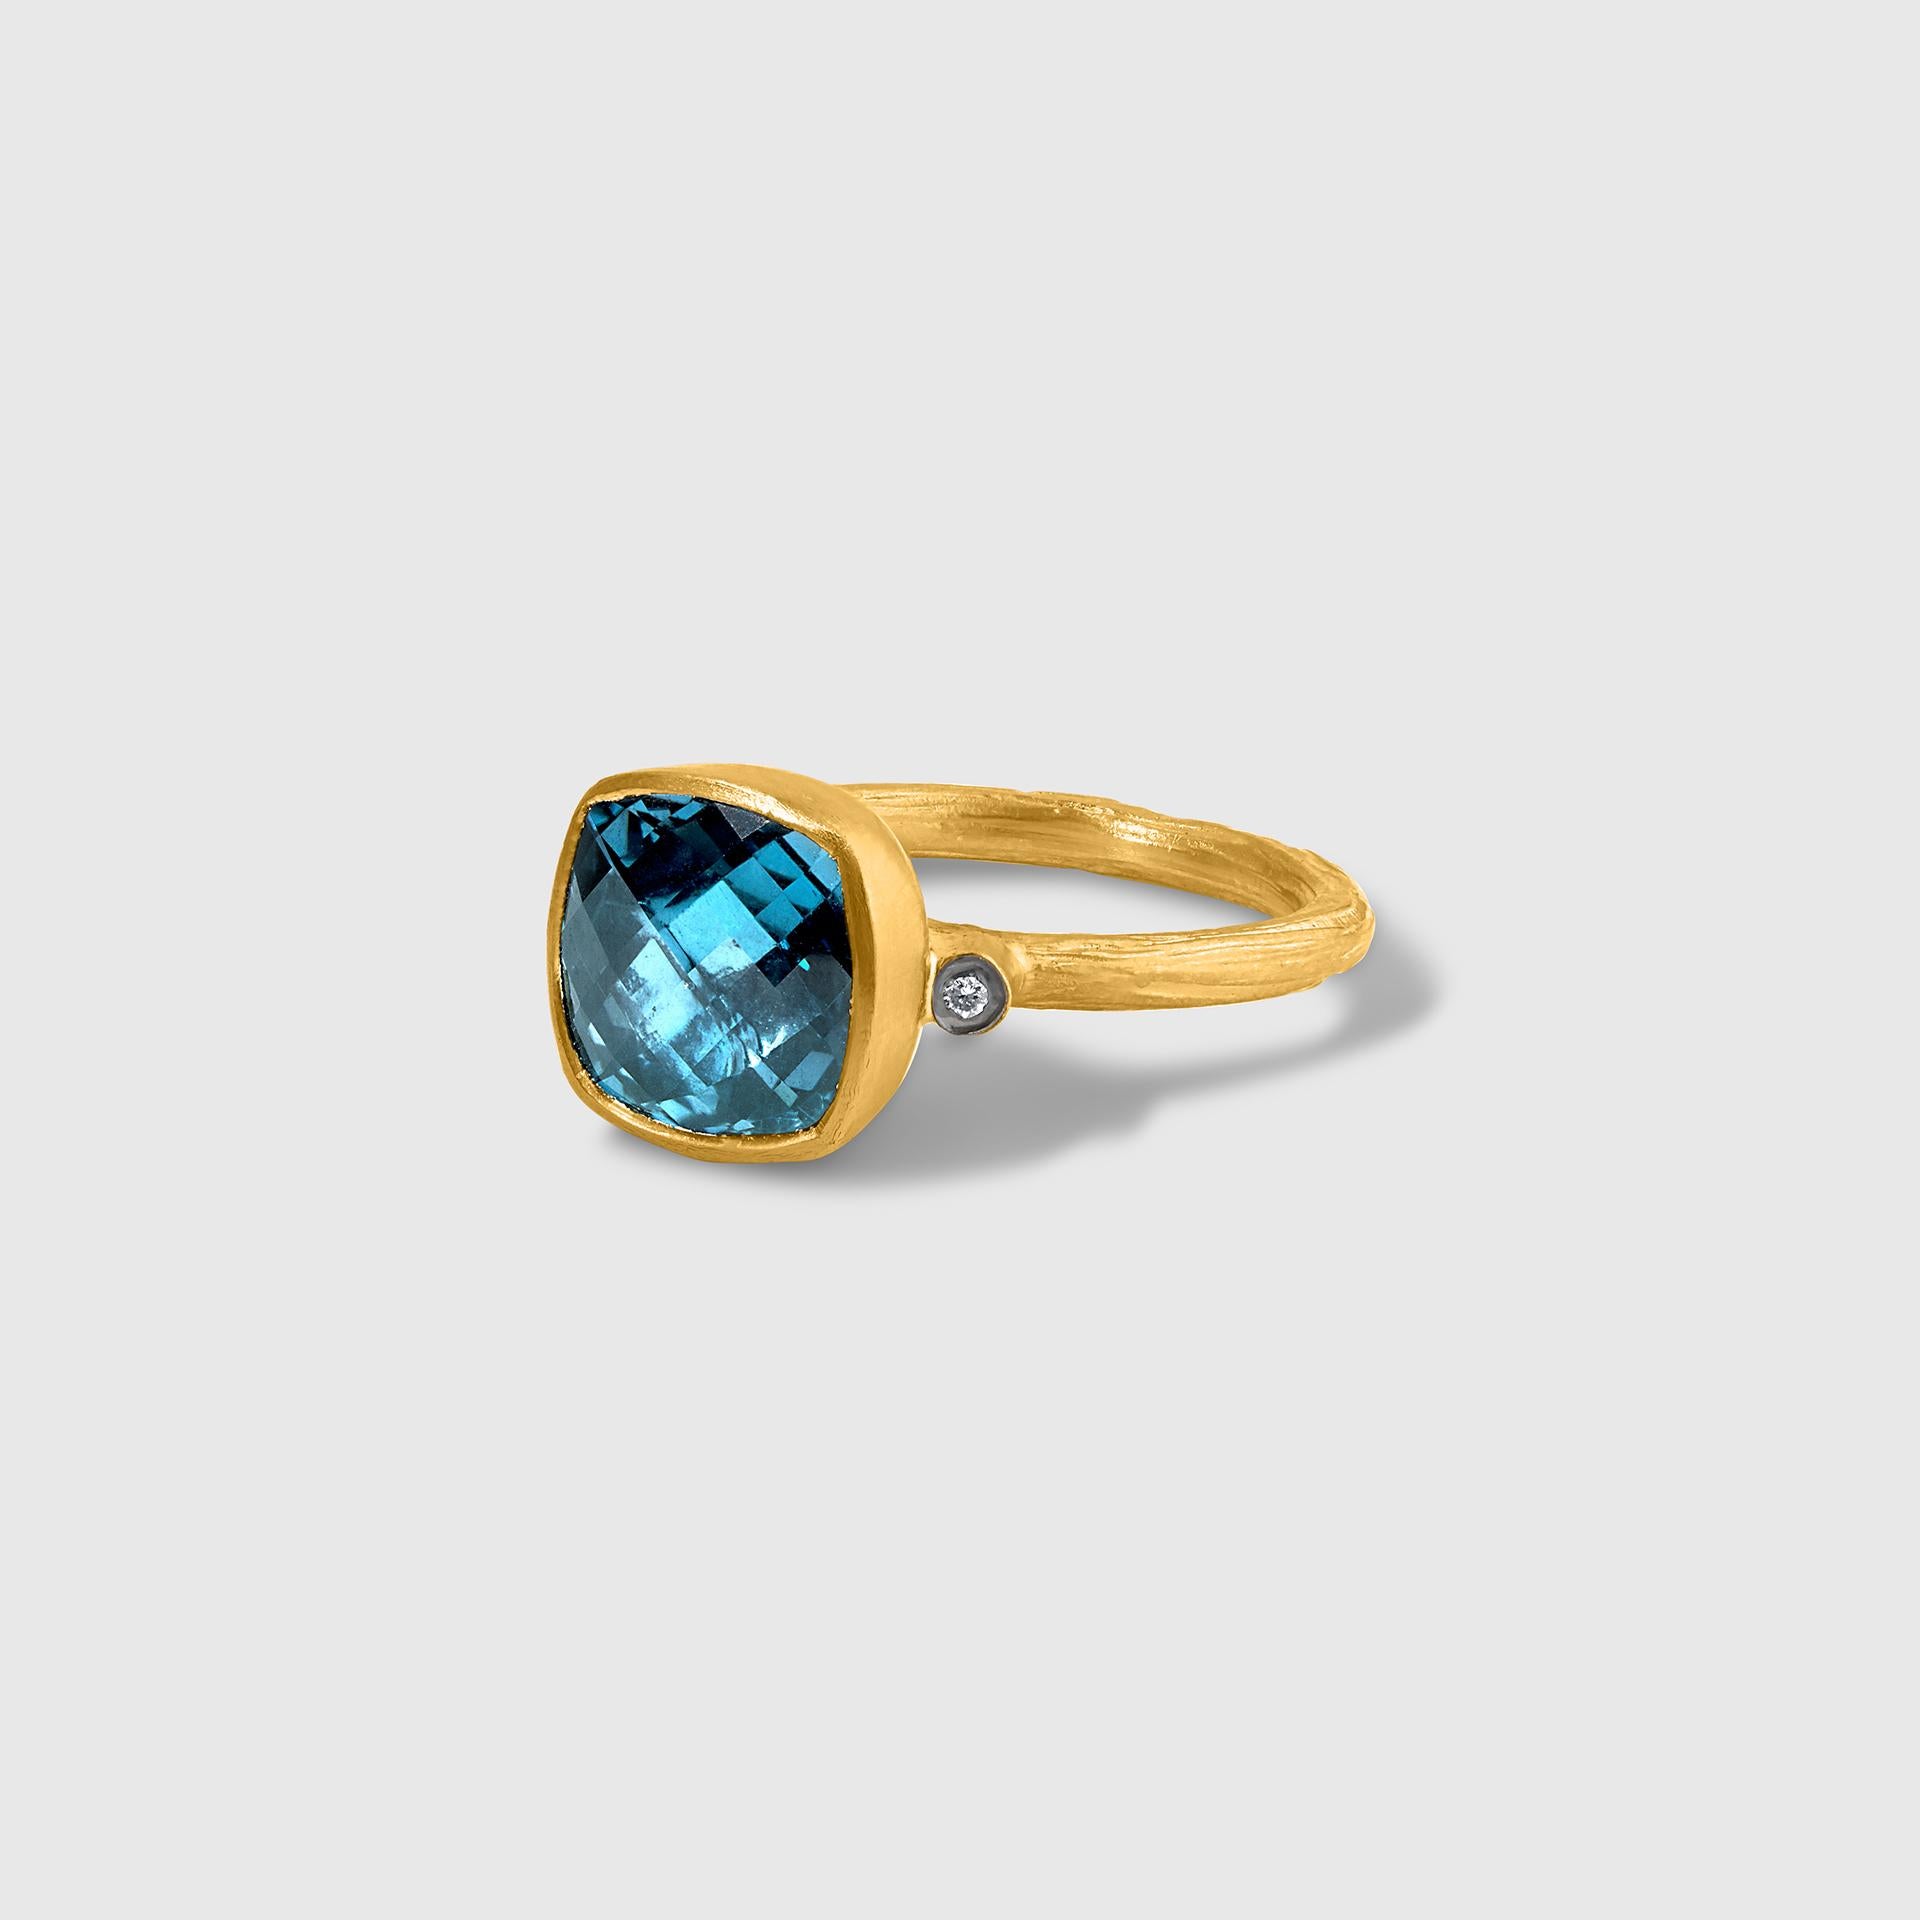 Round Cut 5.74ct Faceted Checkerboard London Blue Topaz & Diamond Ring 24kt Gold & Silver For Sale